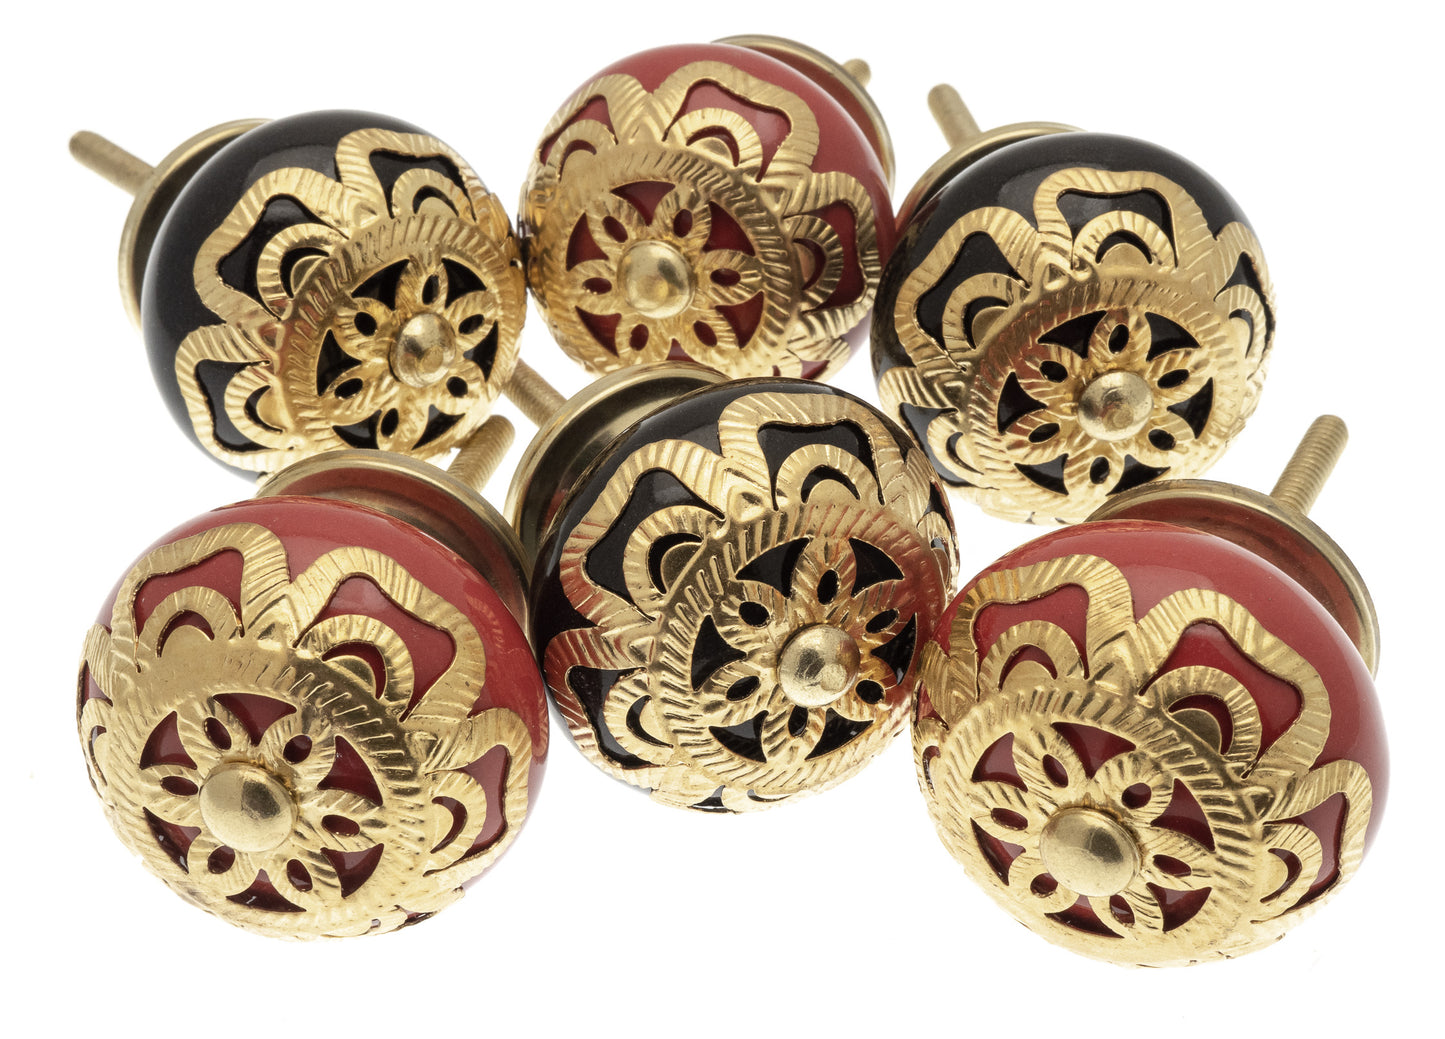 Ceramic Door Knobs Black and Red with Brass Fret Work (Pack of 6)